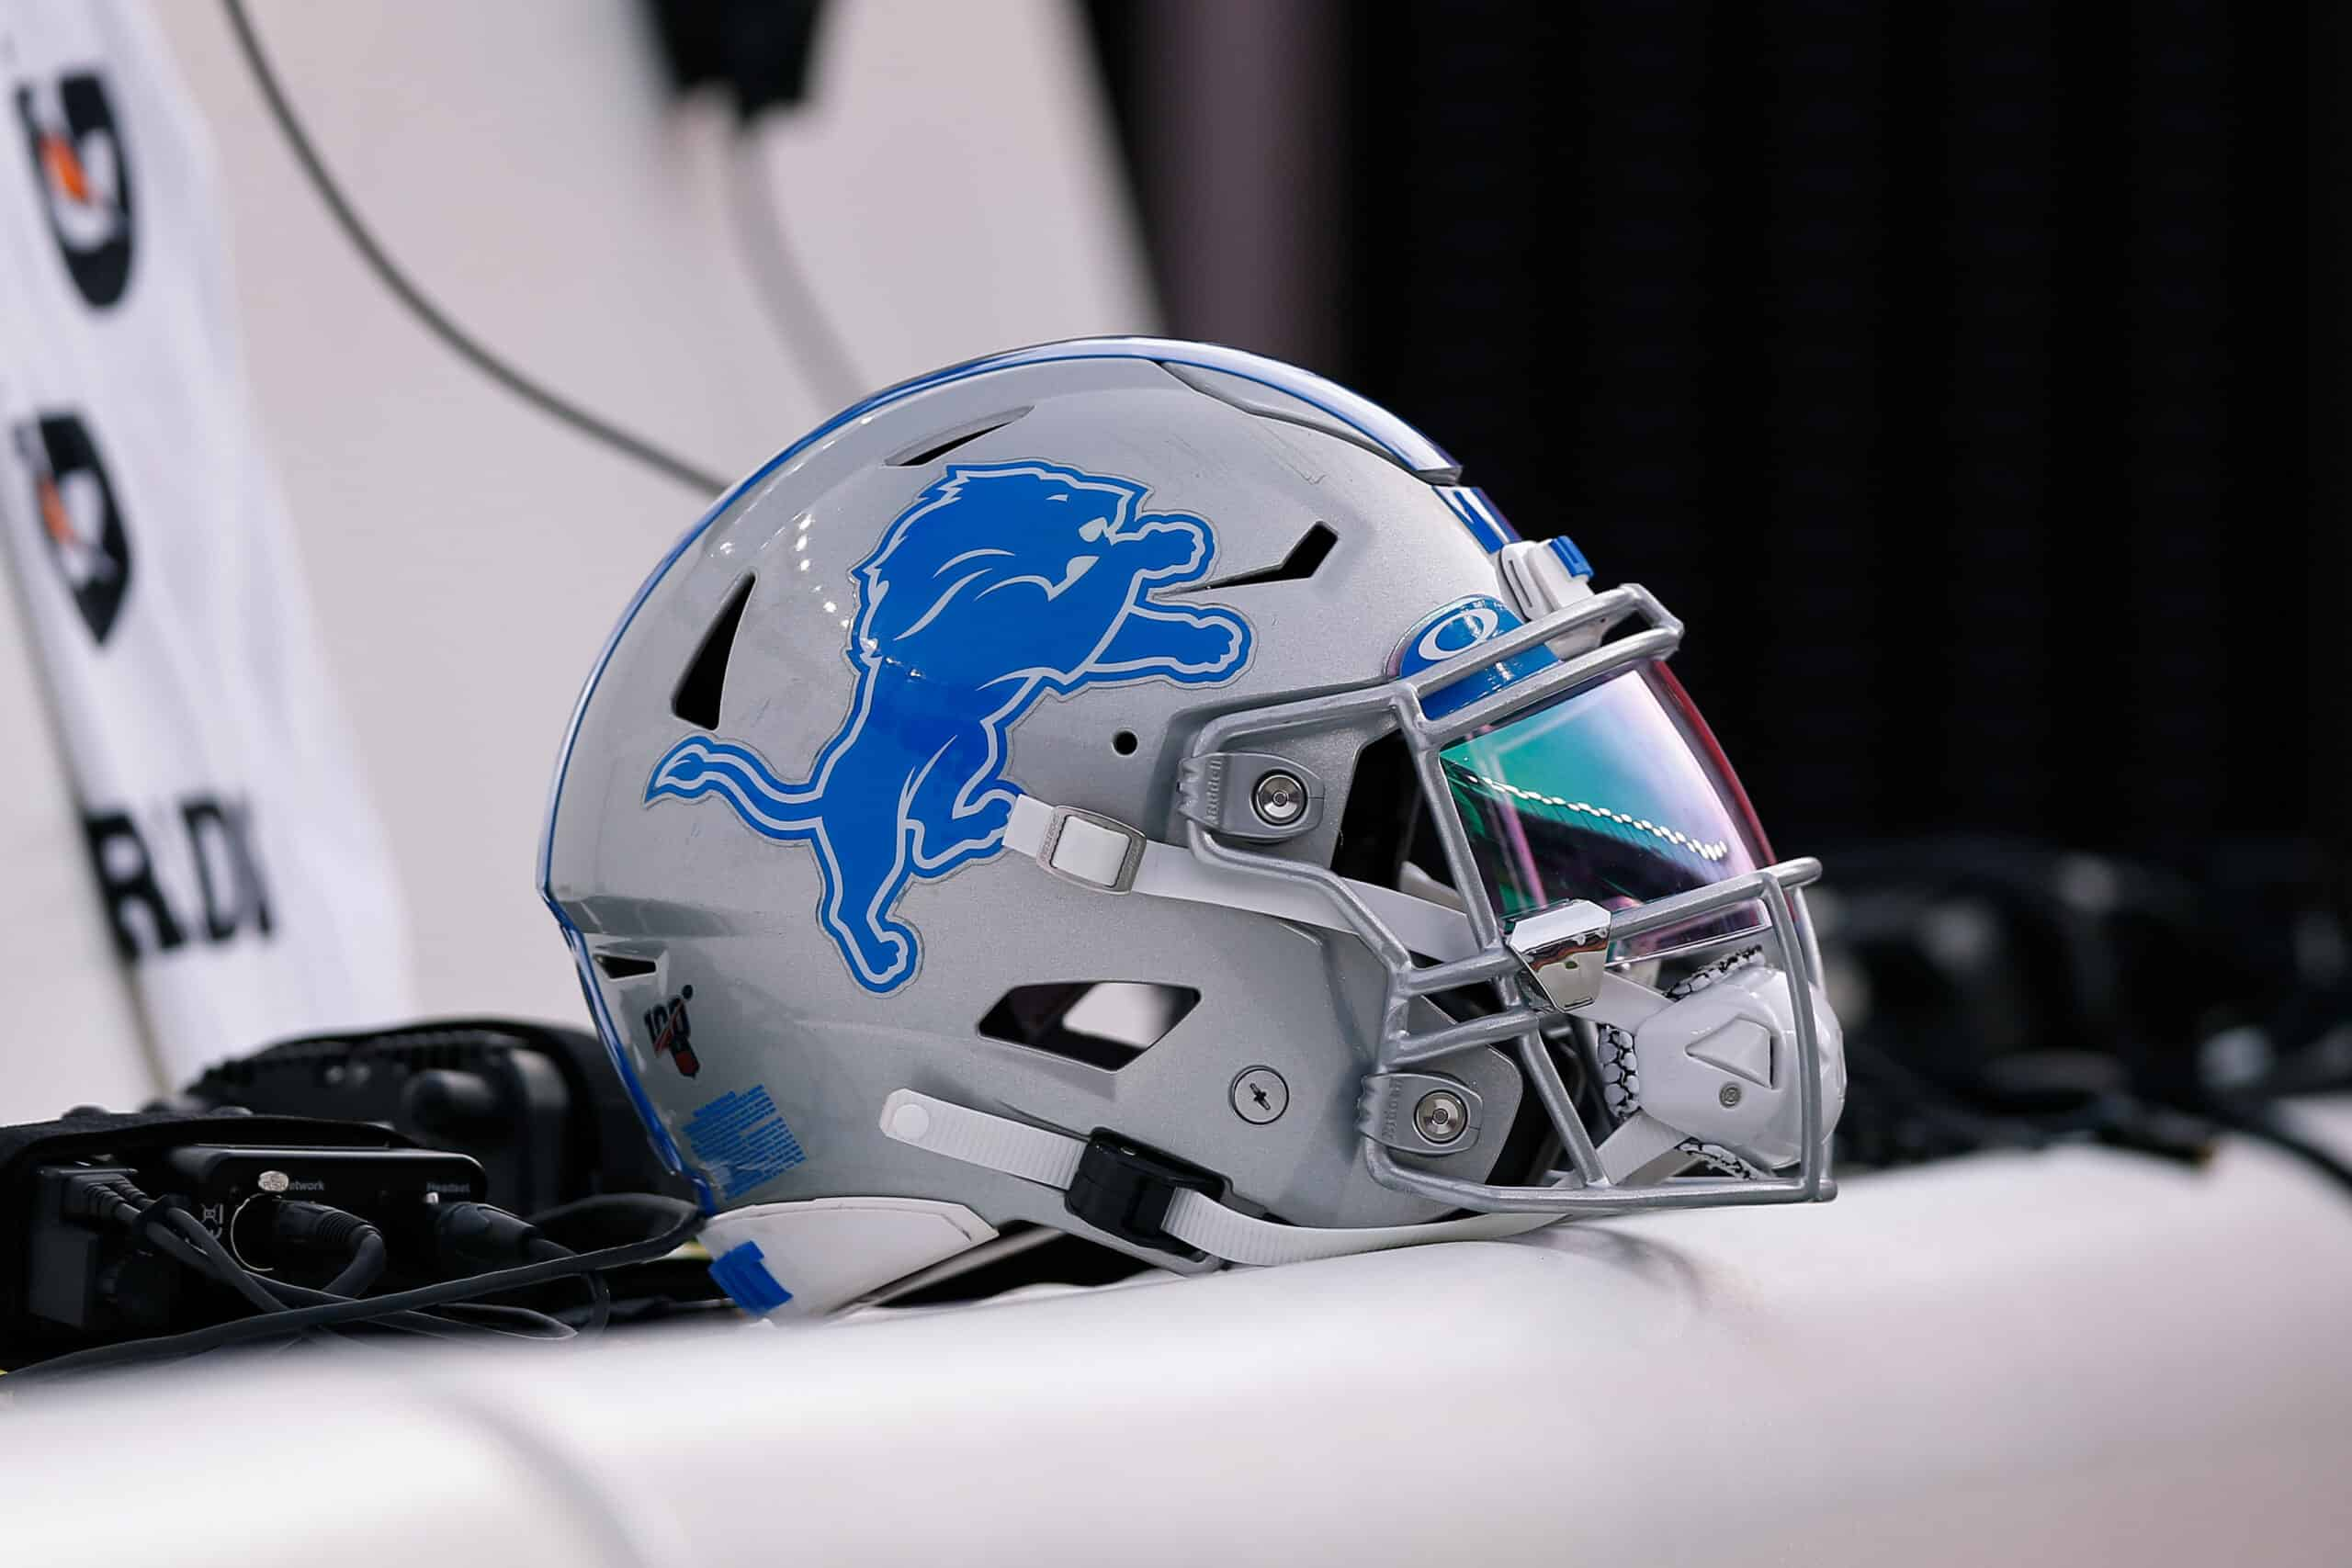 For what reason the Detroit Lions will elevate offensive lineman for matchup vs. Bears.. read more…